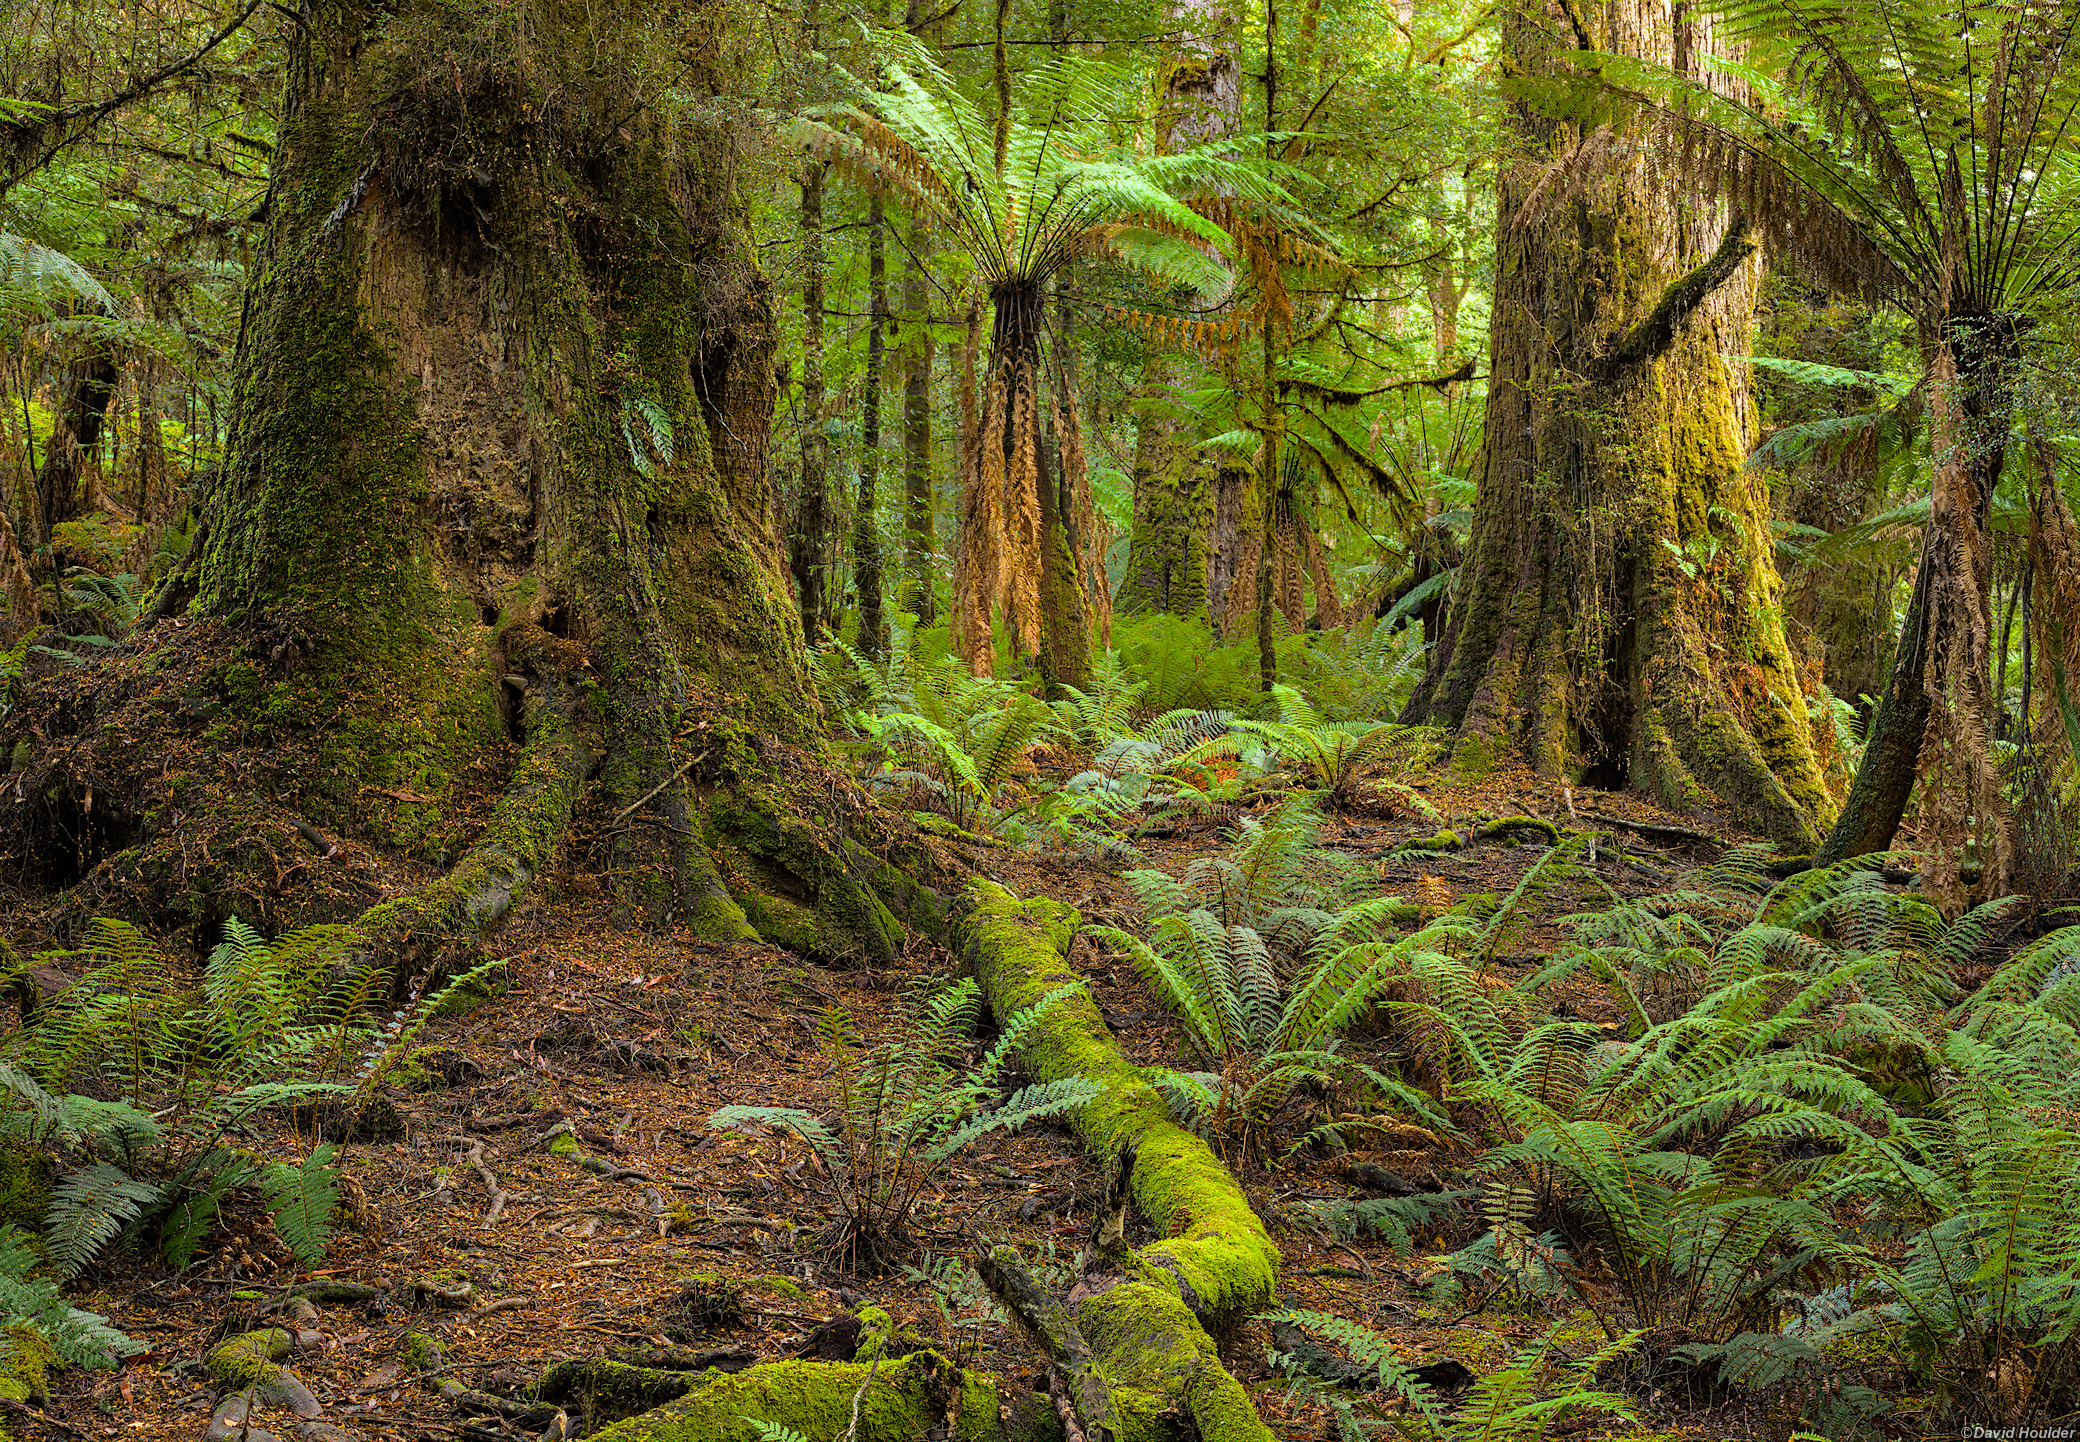 Temperate rainforest with ferns and two large trees